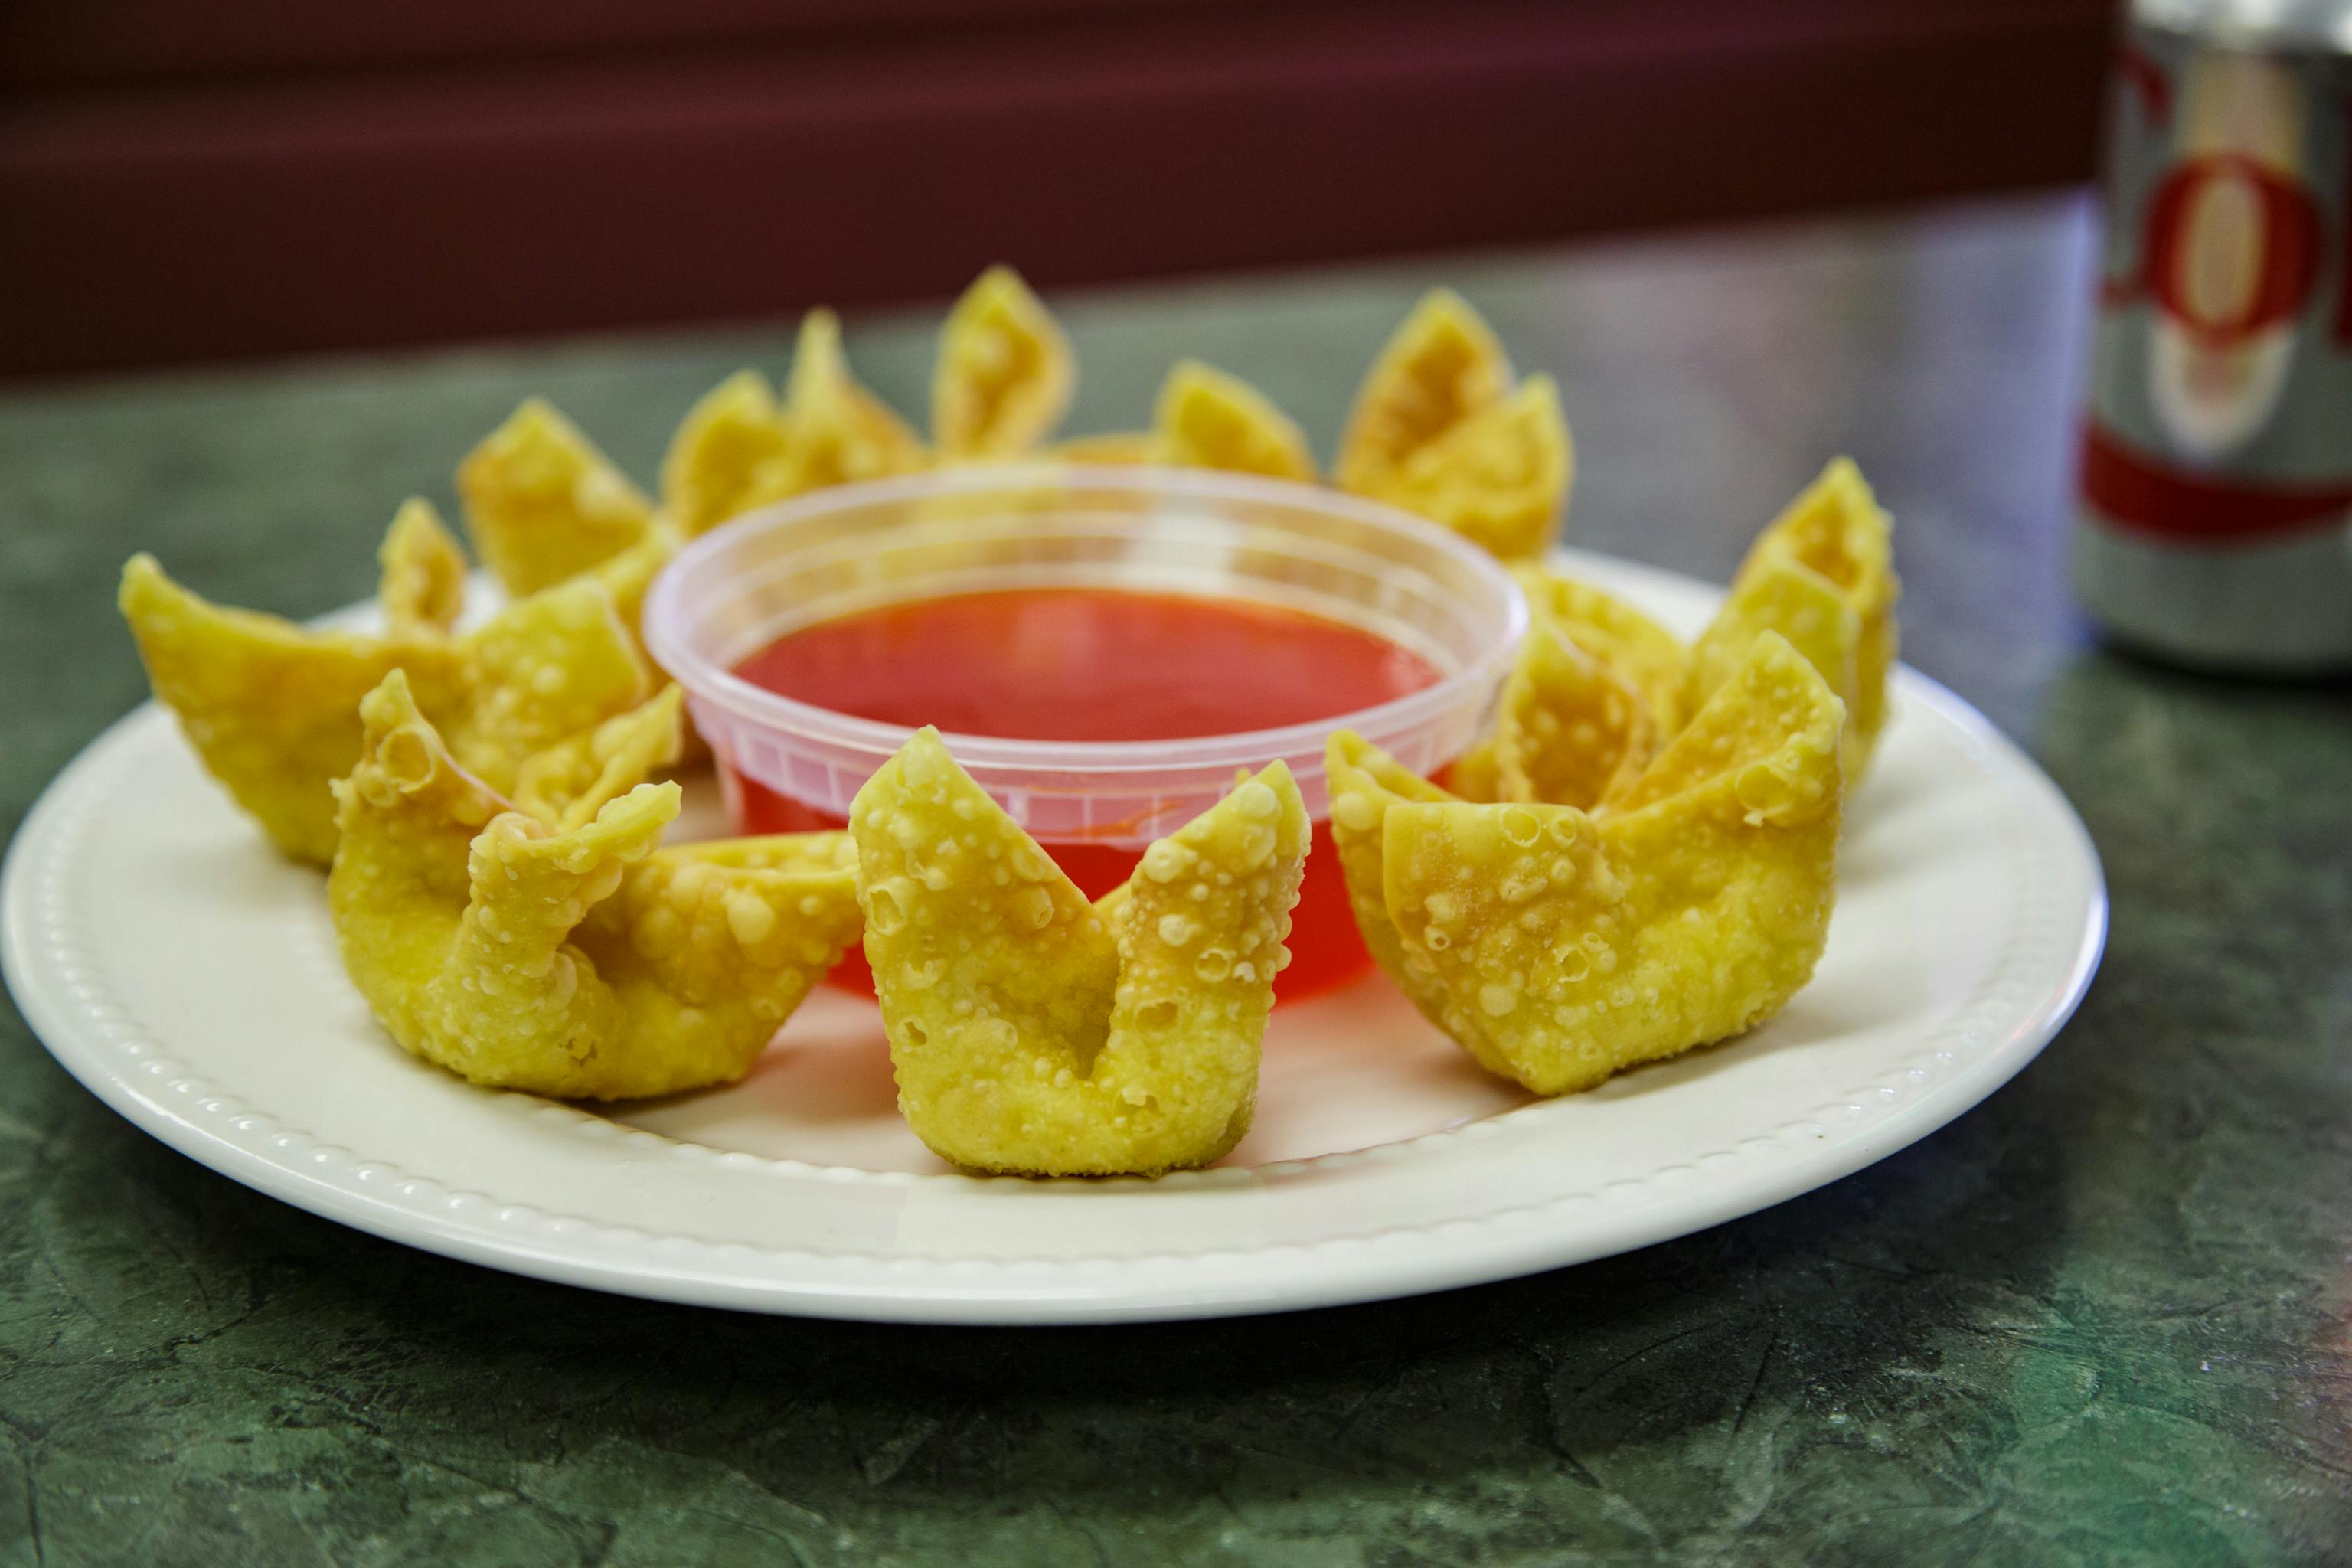 5. Crab Rangoon (8 Pieces) from China Wok in Madison, WI